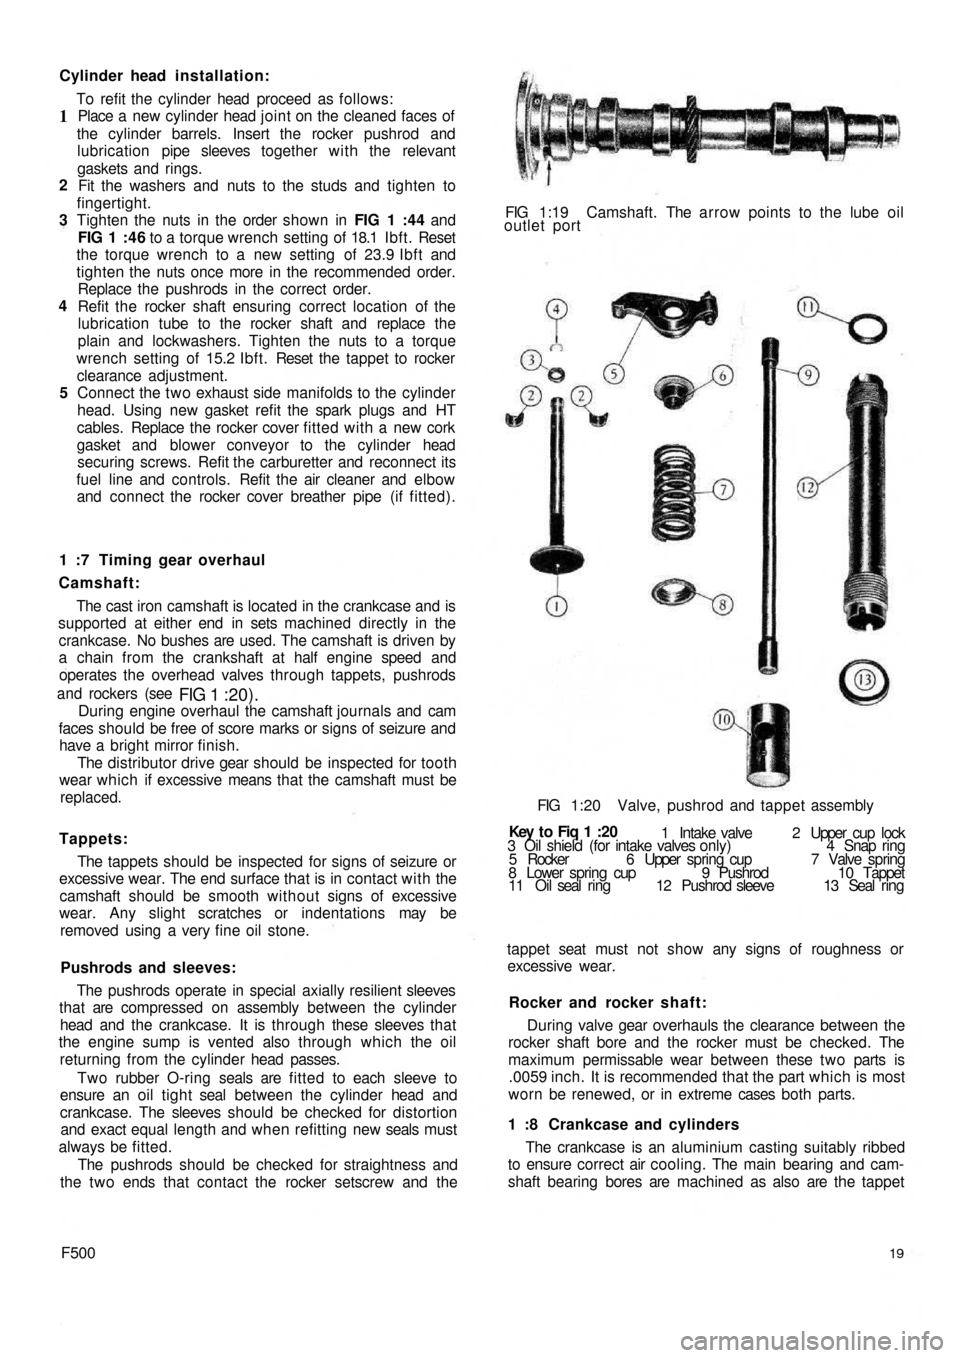 FIAT 500 1969 1.G User Guide Cylinder head installation:
To refit the cylinder head proceed as follows:
Place a  new cylinder  head joint on the cleaned faces of
the cylinder barrels. Insert the rocker pushrod and
lubrication pip